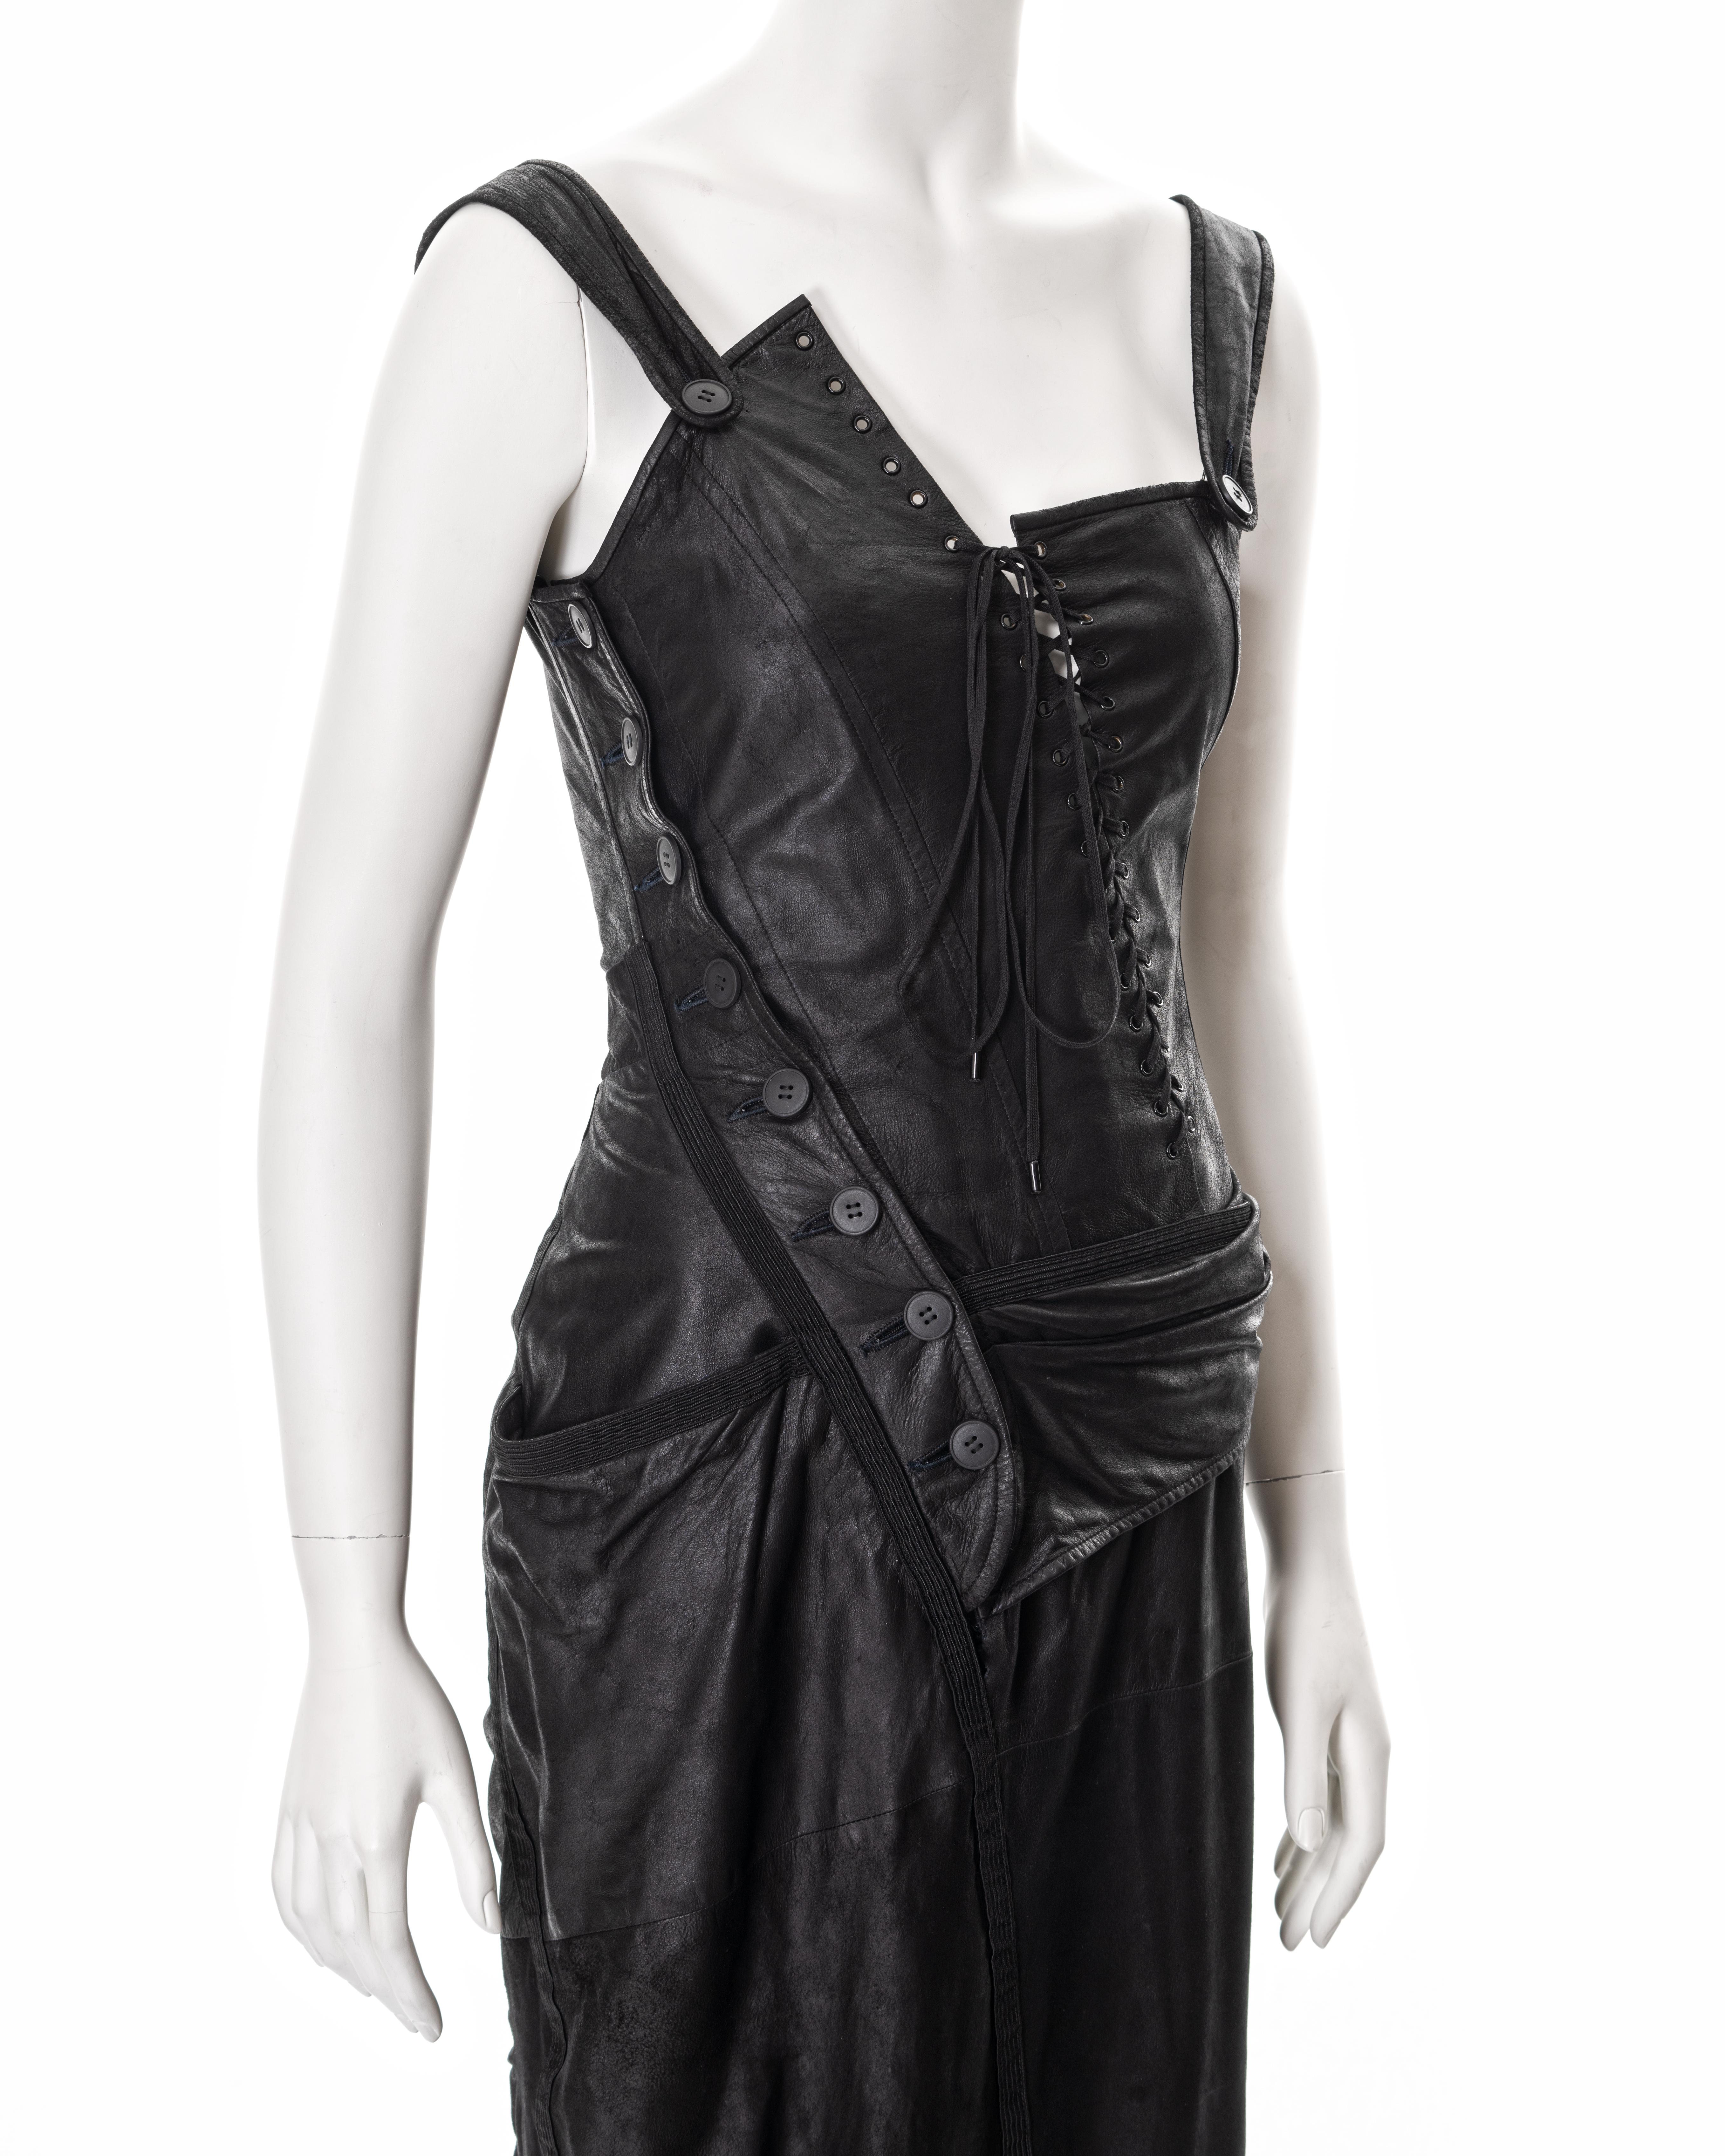 Christian Dior by John Galliano black leather deconstructed dress, ss 2000 1